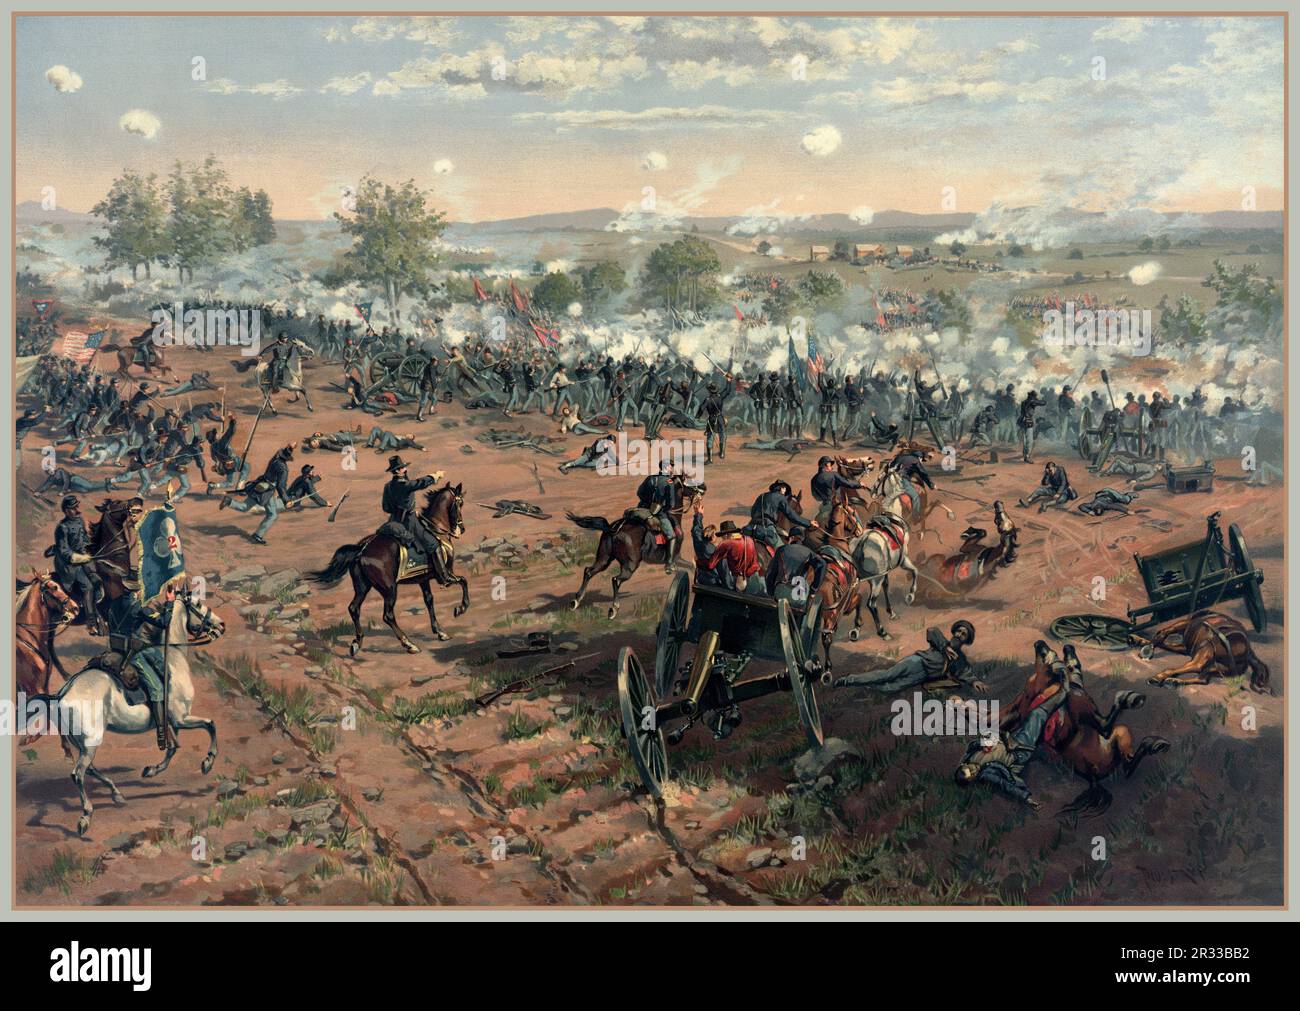 Battle of Gettysburg L. Prang & Co. print of the painting 'Hancock at Gettysburg' by Thure de Thulstrup, showing Pickett's Charge.  1887 Pickett's Charge was a bloodbath. While the Union suffered 1,500 casualties, the Confederates had over 6,000. Over 50% of the men sent across the fields were killed or wounded. Pickett's division alone, out of about 5,500 men, lost 224 killed, 1,140 wounded, and 1,499 missing/captured. Stock Photo